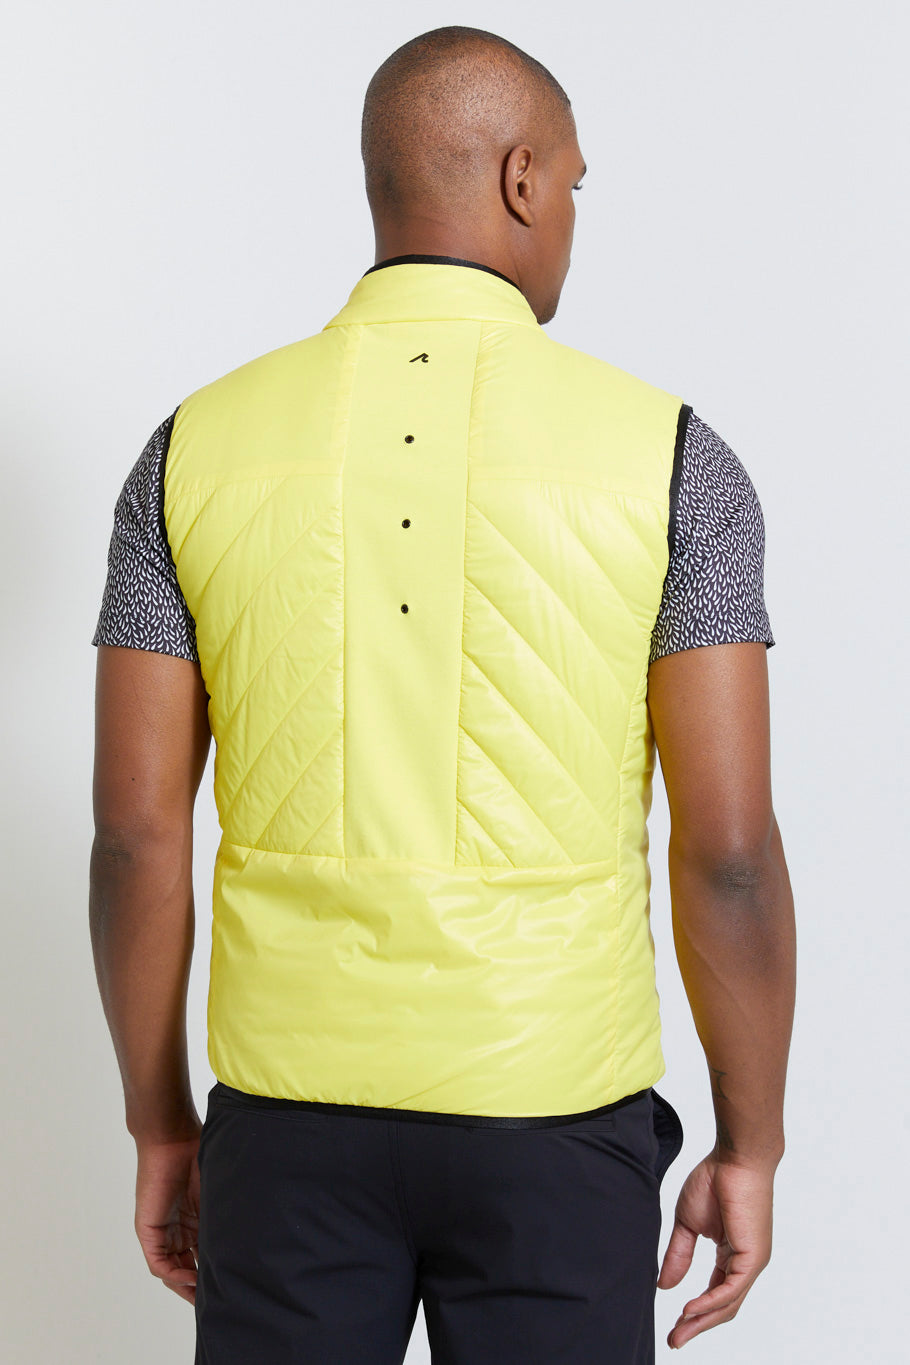 Image of the harding vest in sun ss23